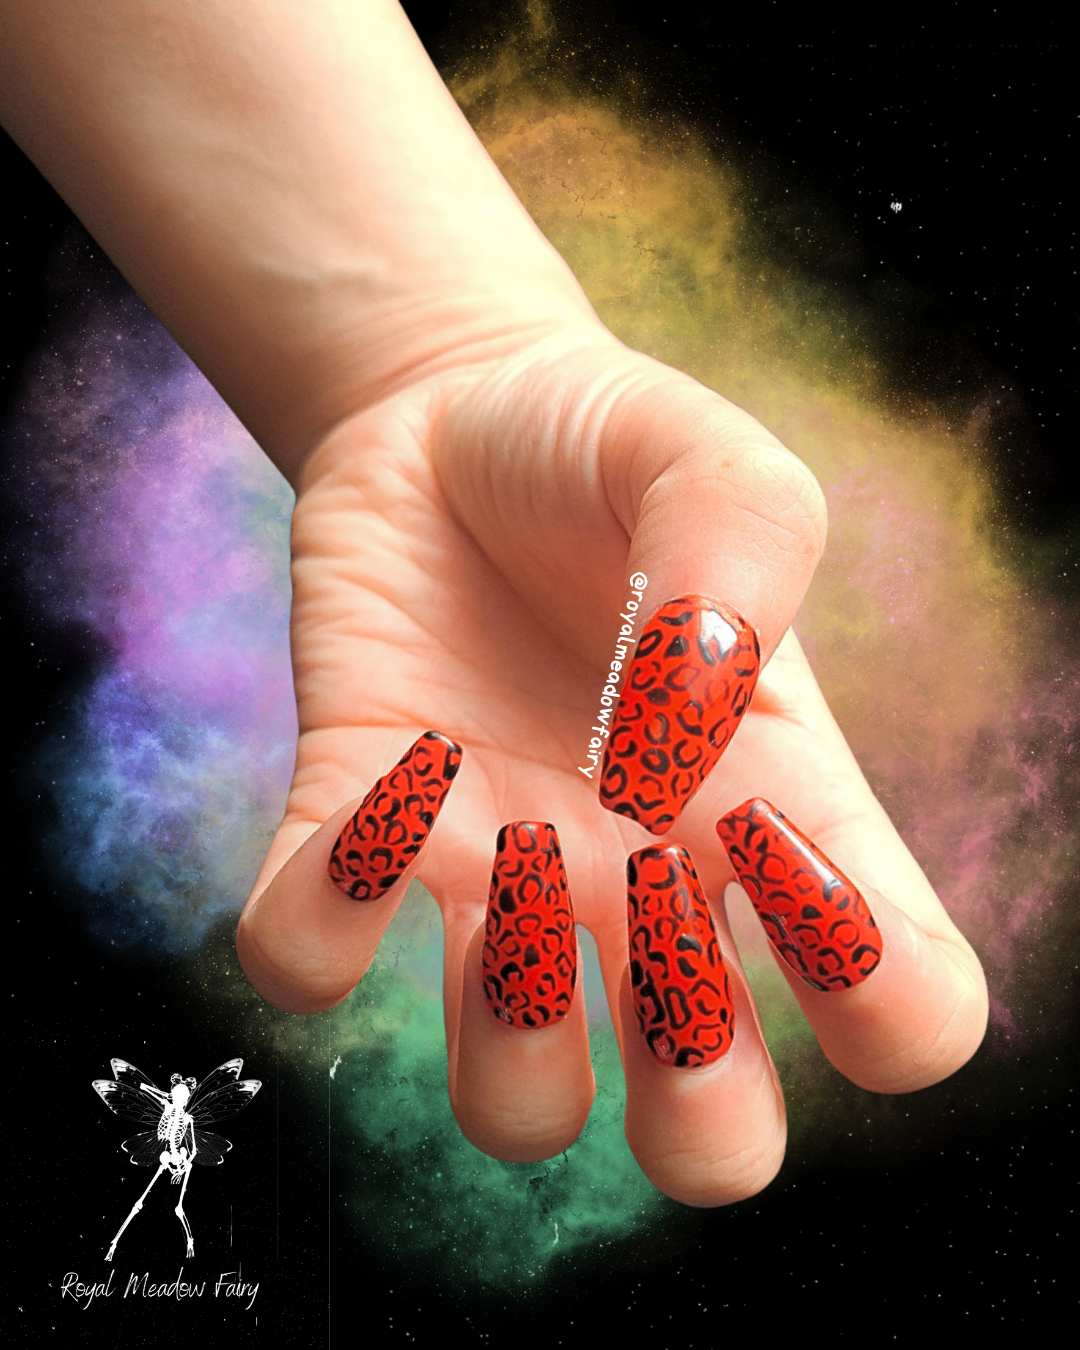 Red and gold nails with leopard spots | Red and gold nails, Nail art  designs, Red nail designs